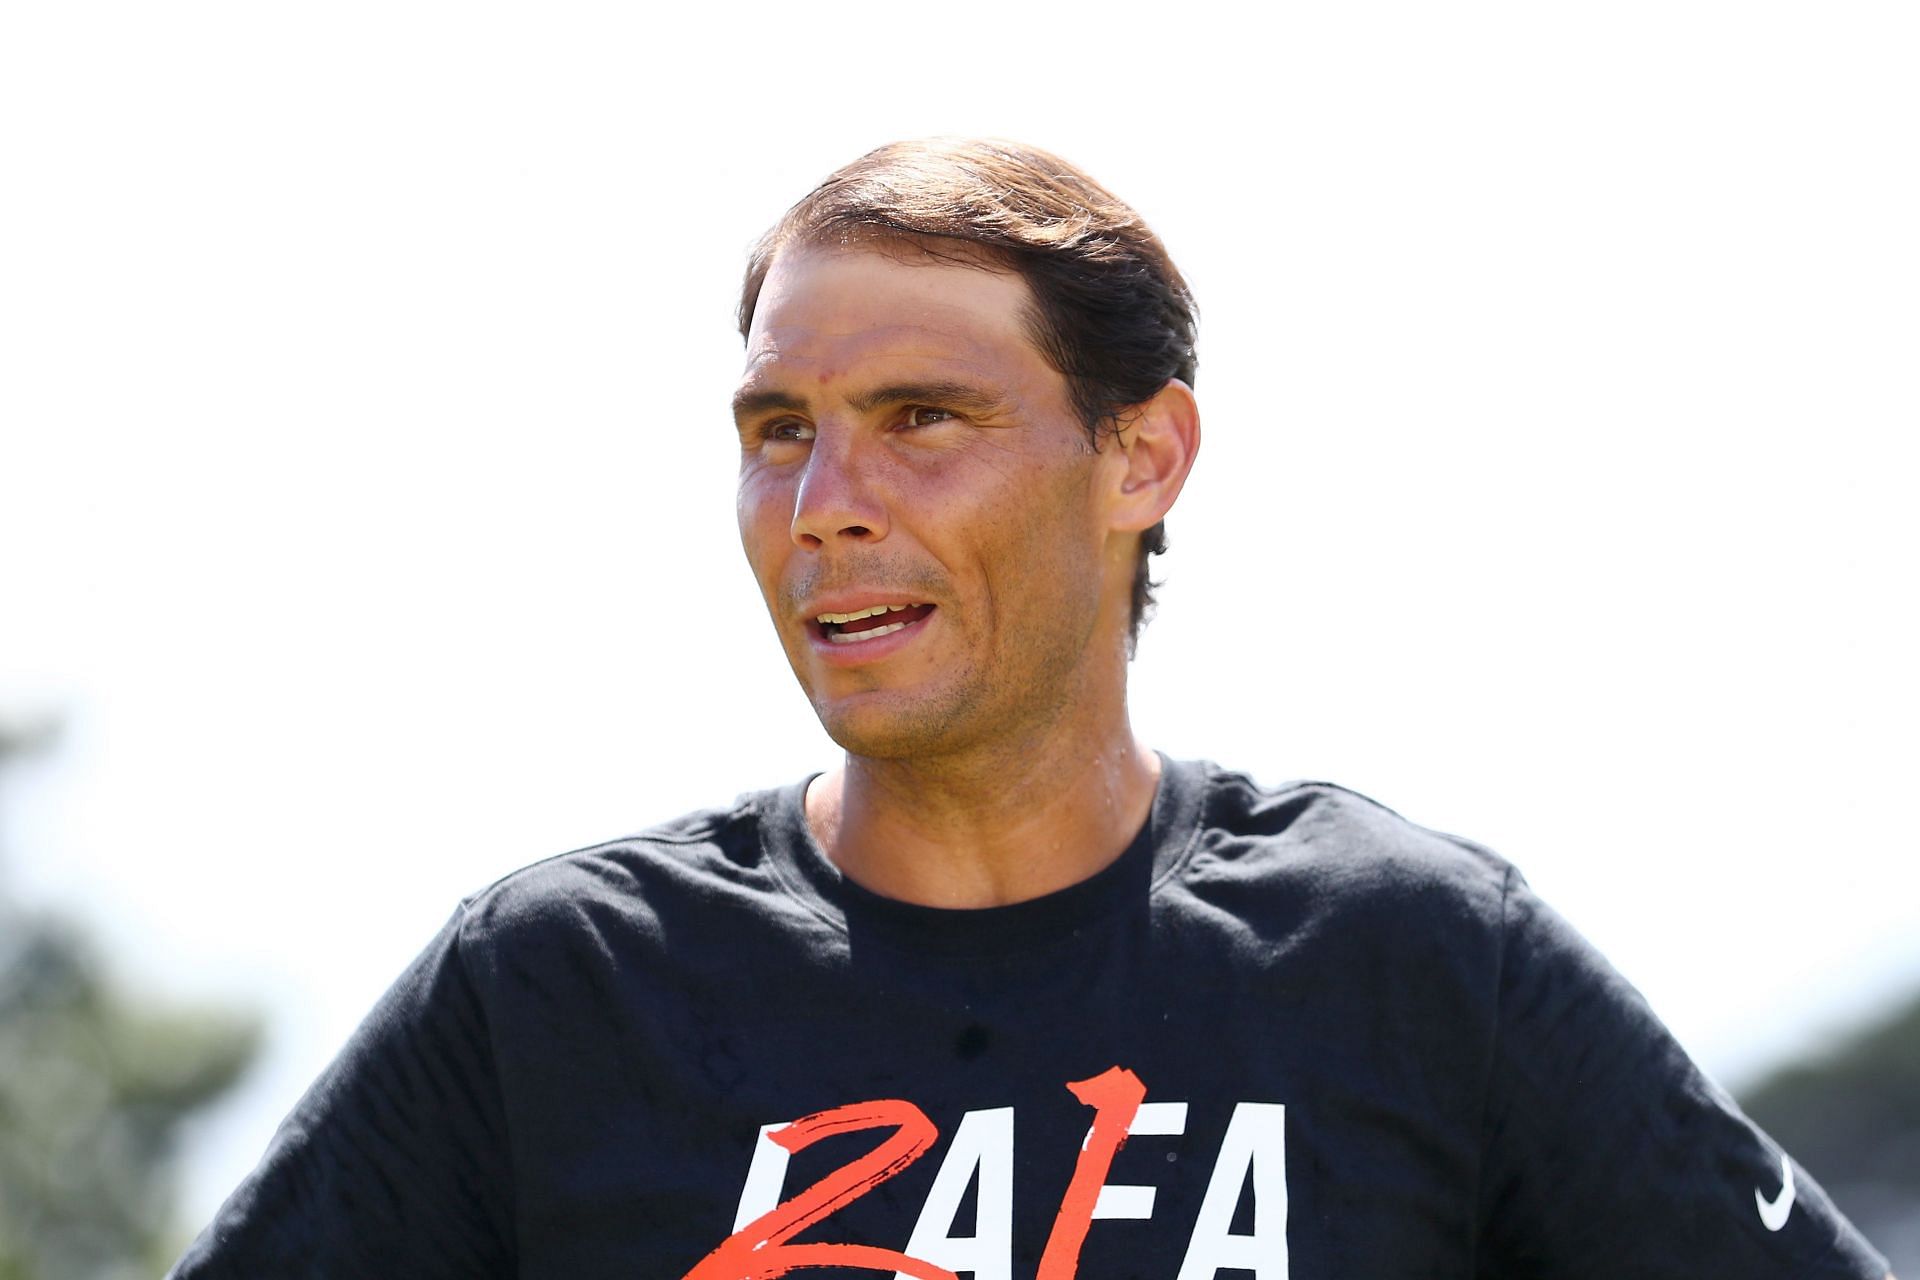 Nadal sent out a heartfelt message to a cancer-stricken commentator recently